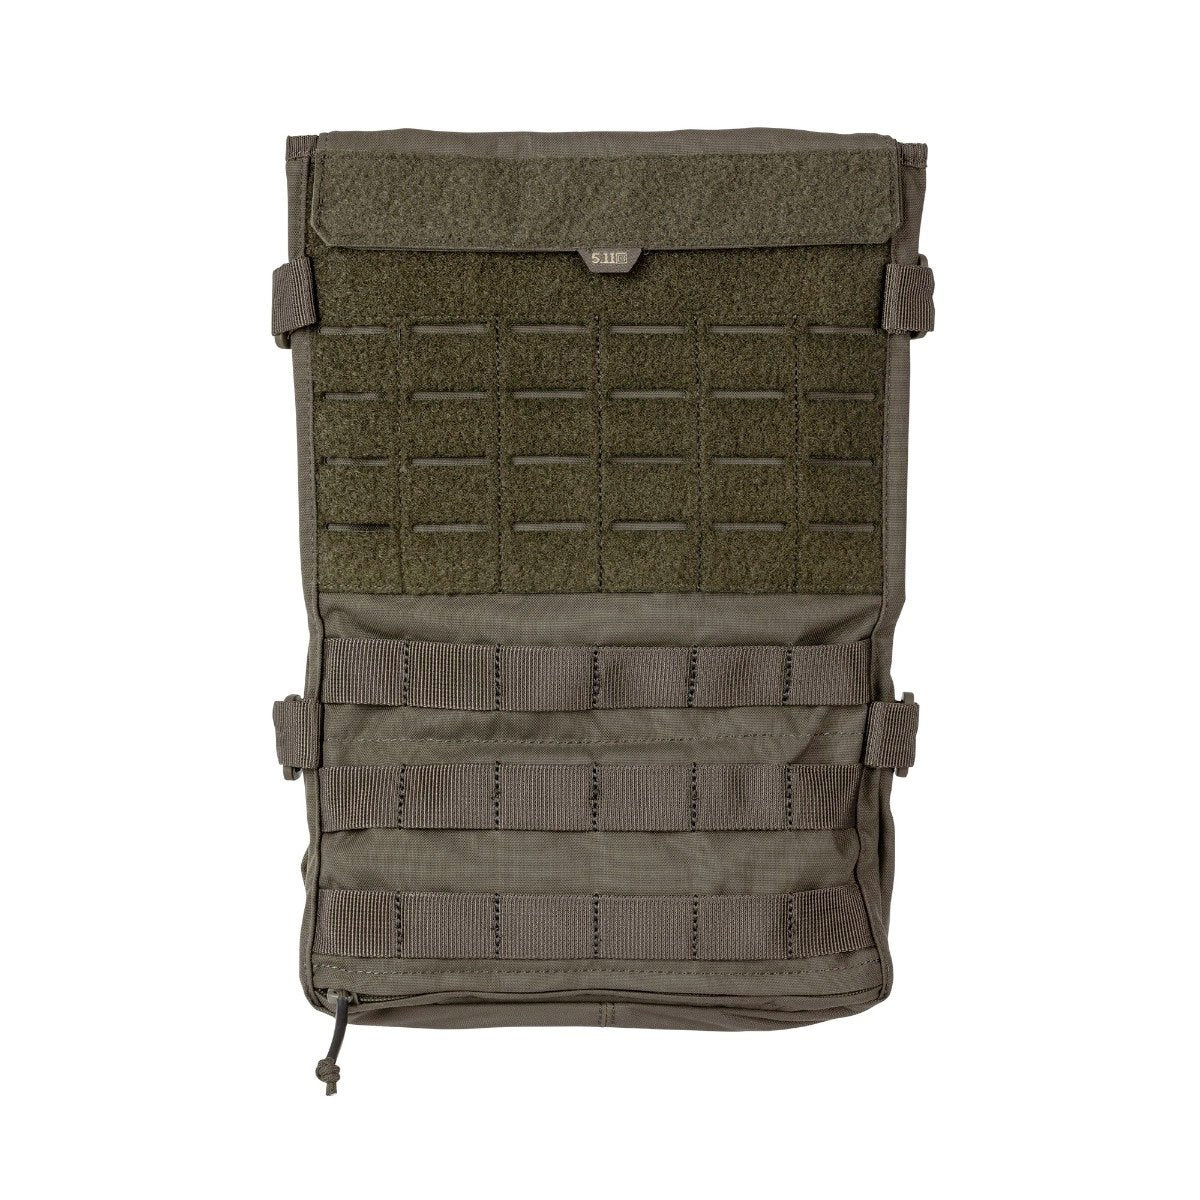 5.11 Tactical PC Convertible Hydration Carrier Hydration 5.11 Tactical Tactical Gear Supplier Tactical Distributors Australia